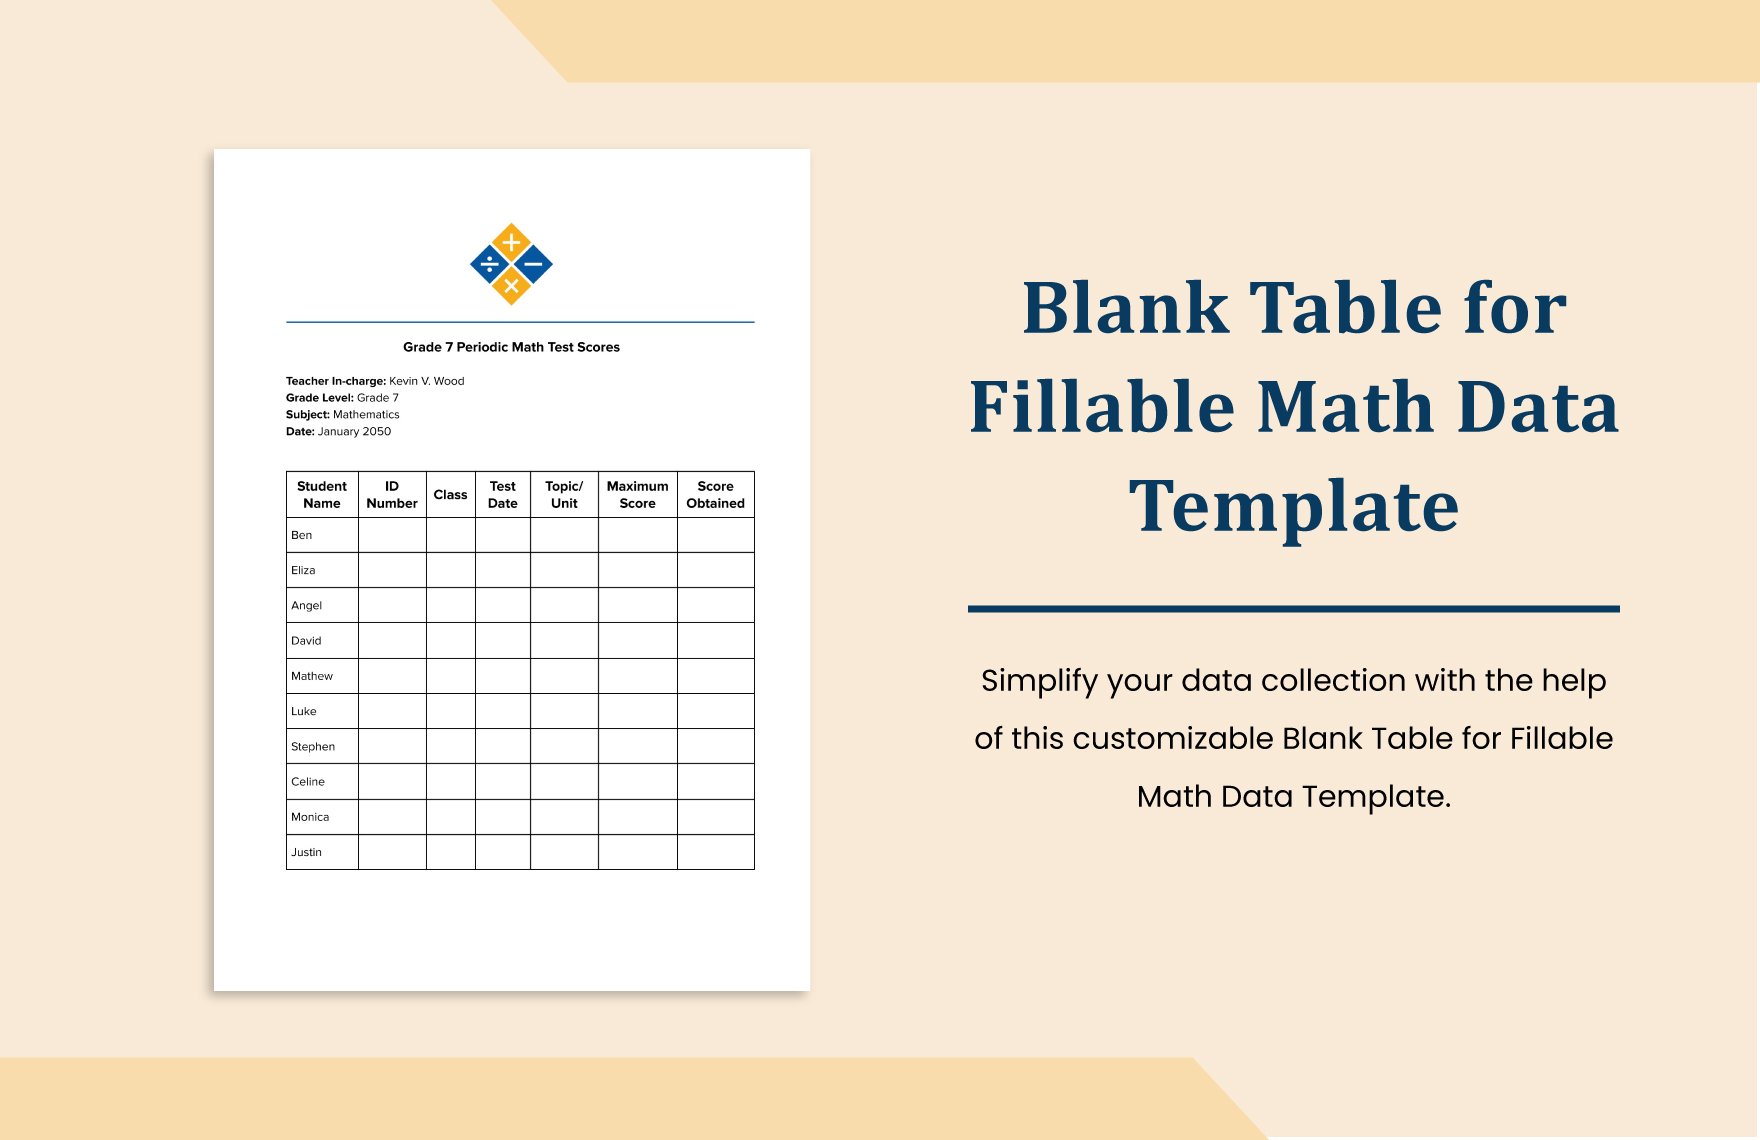 Blank Table for Fillable Math Data Template